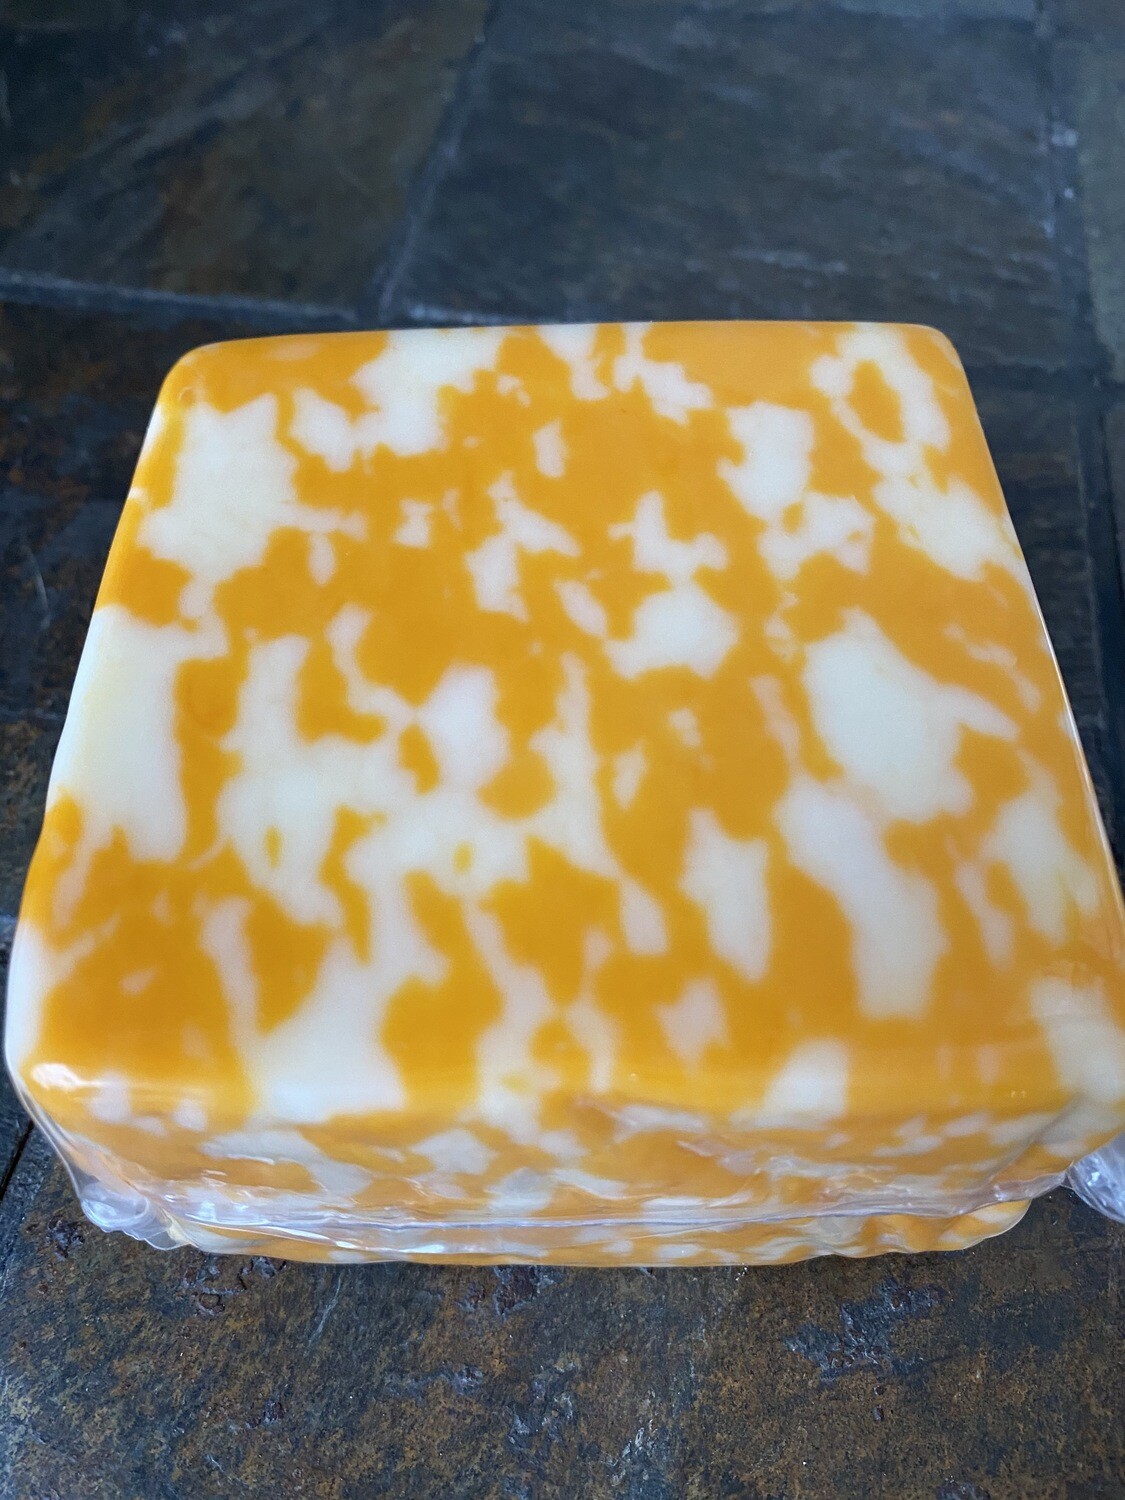 Colby Jack (Marble), 1 lb.